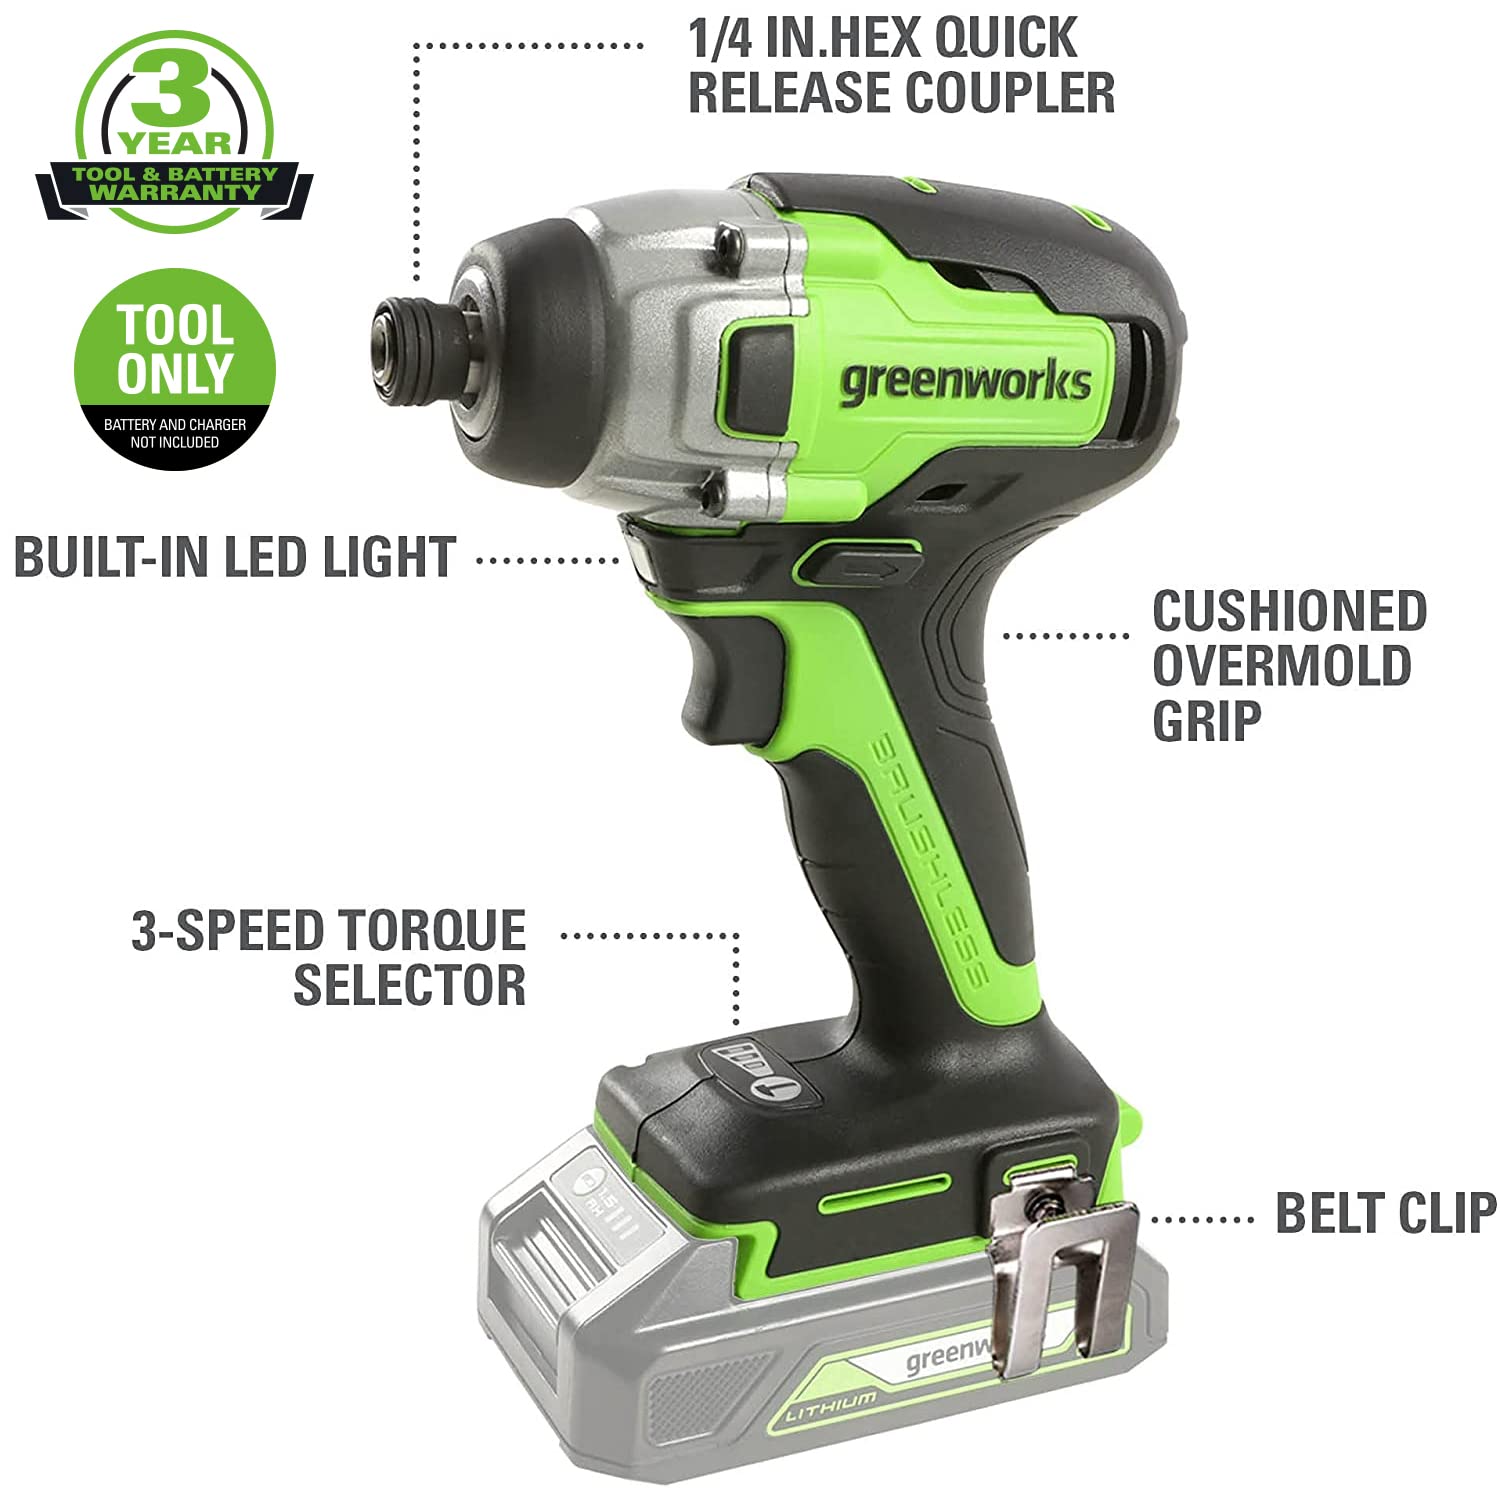 24V Brushless Drill, Impact Driver  Jig Saw Combo Kit  Tool Bag  Greenworks Tools